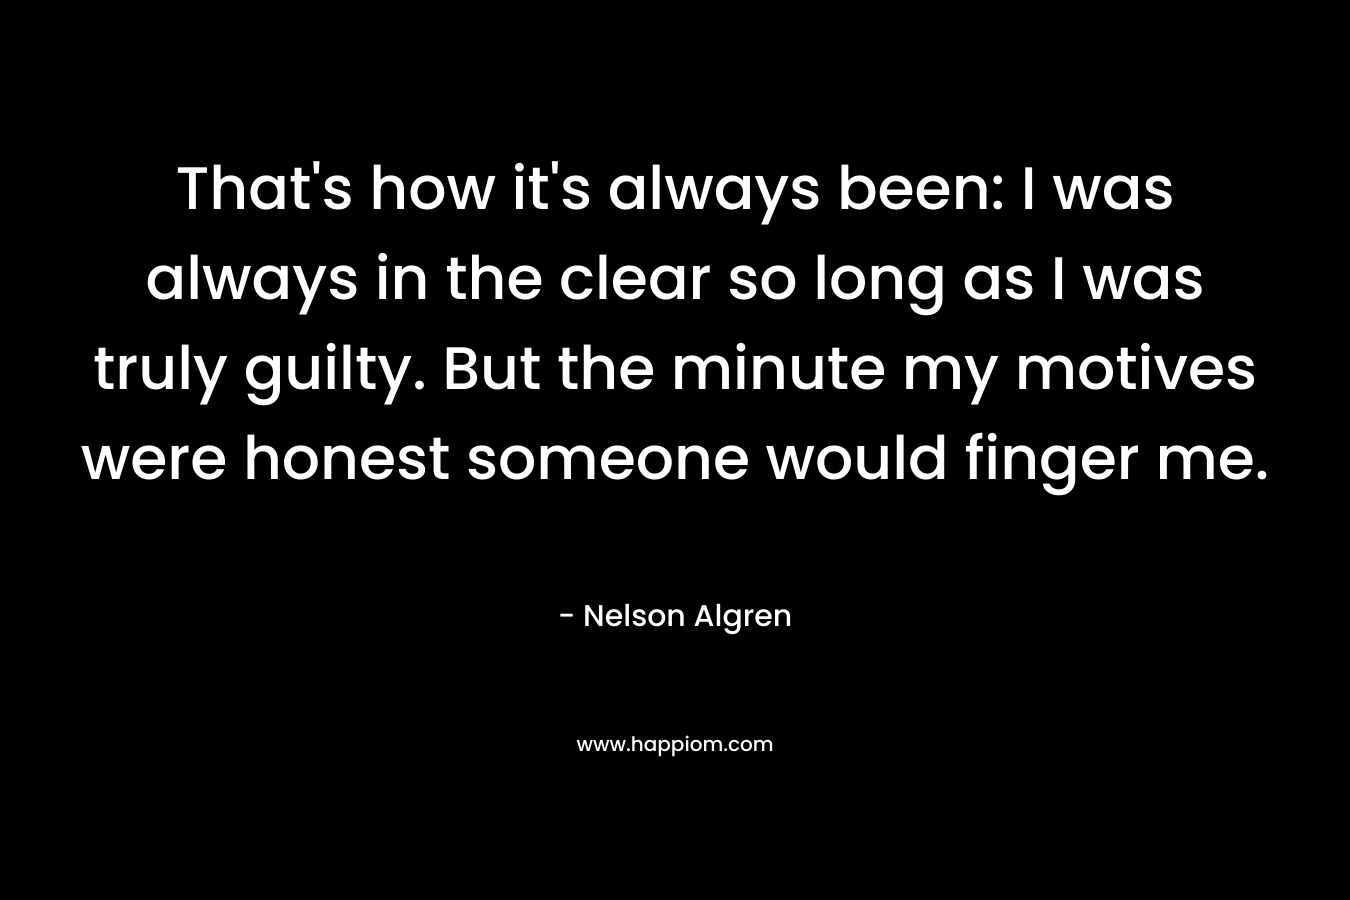 That’s how it’s always been: I was always in the clear so long as I was truly guilty. But the minute my motives were honest someone would finger me. – Nelson Algren